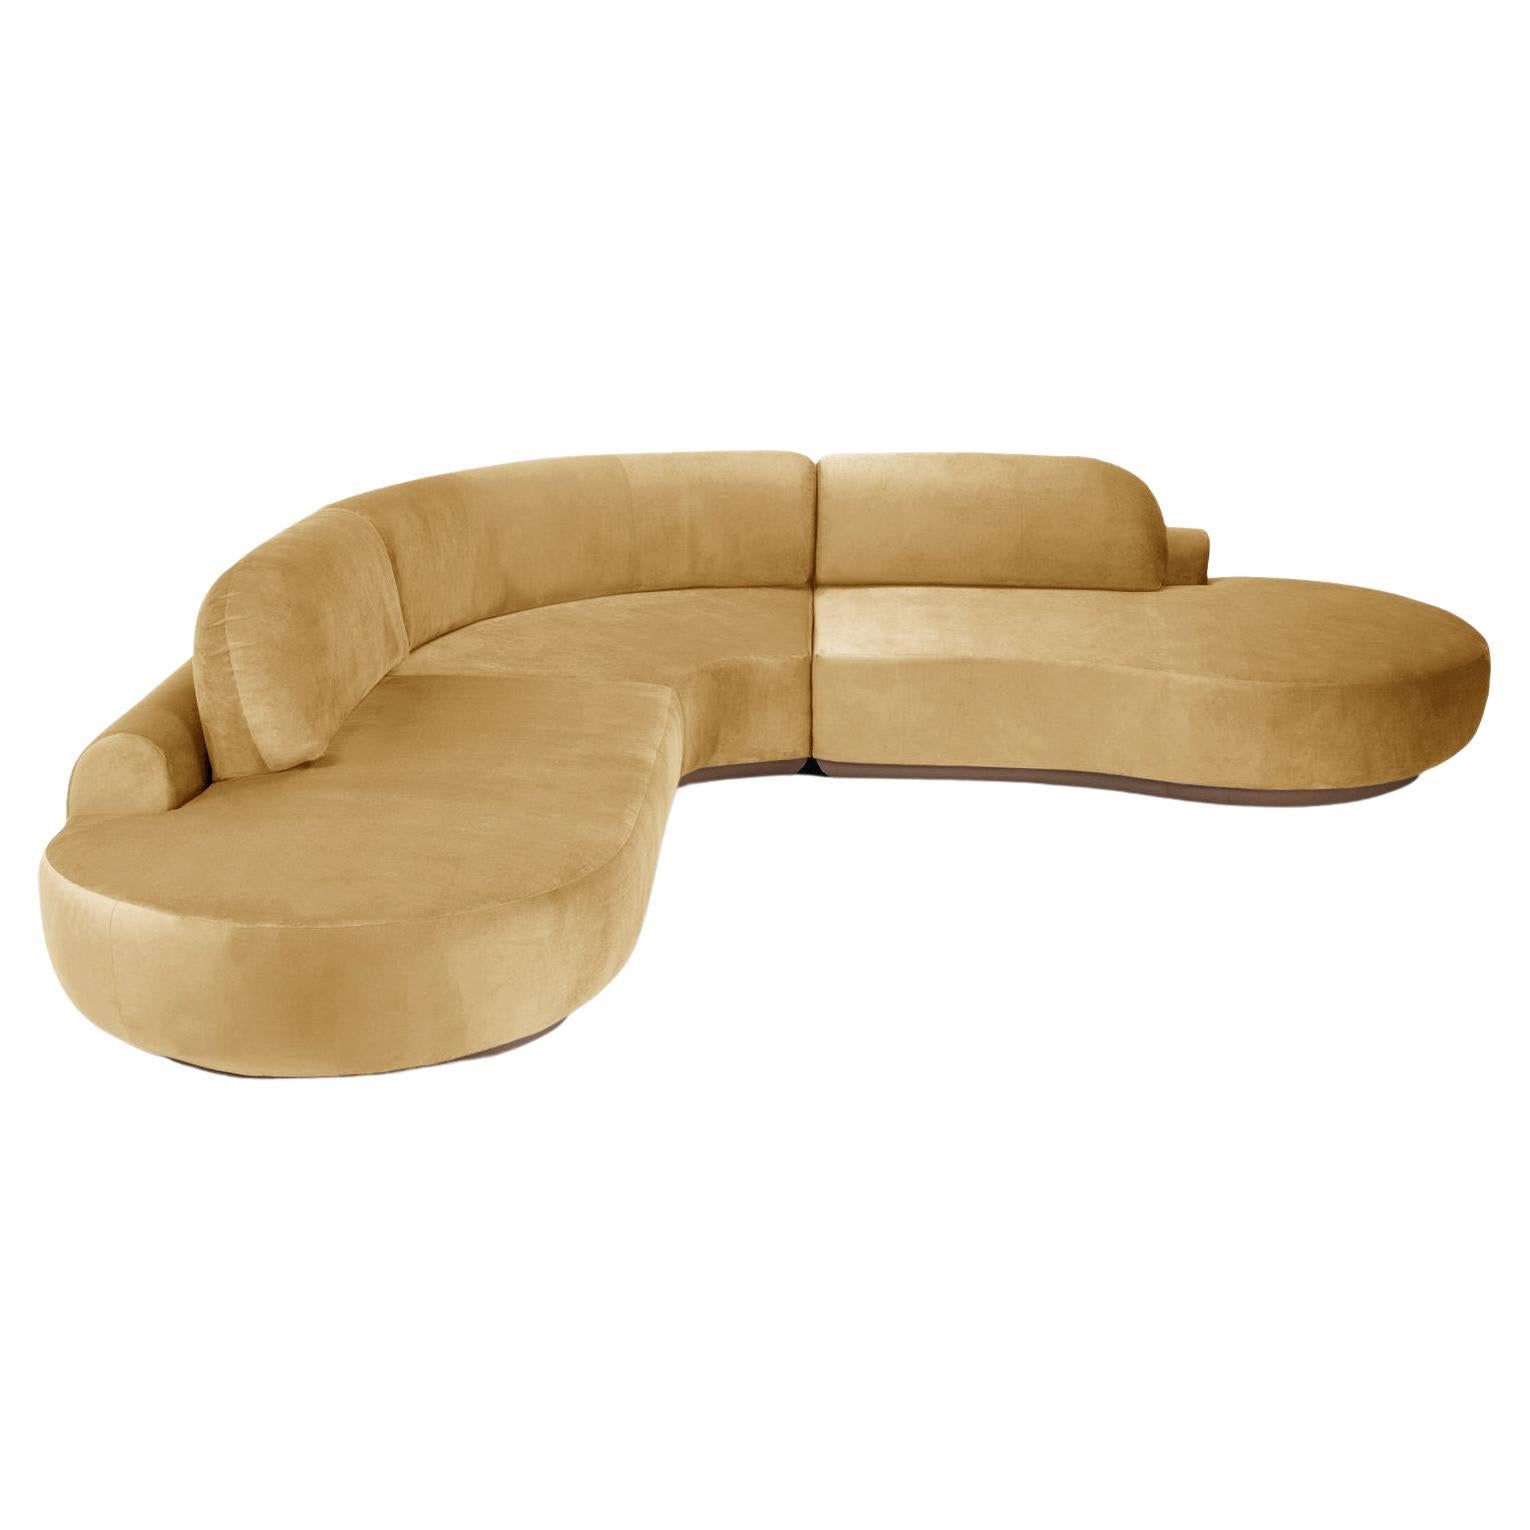 Naked Curved Sectional Sofa, 3 Piece with Beech Ash-056-1 and Vigo Plantain